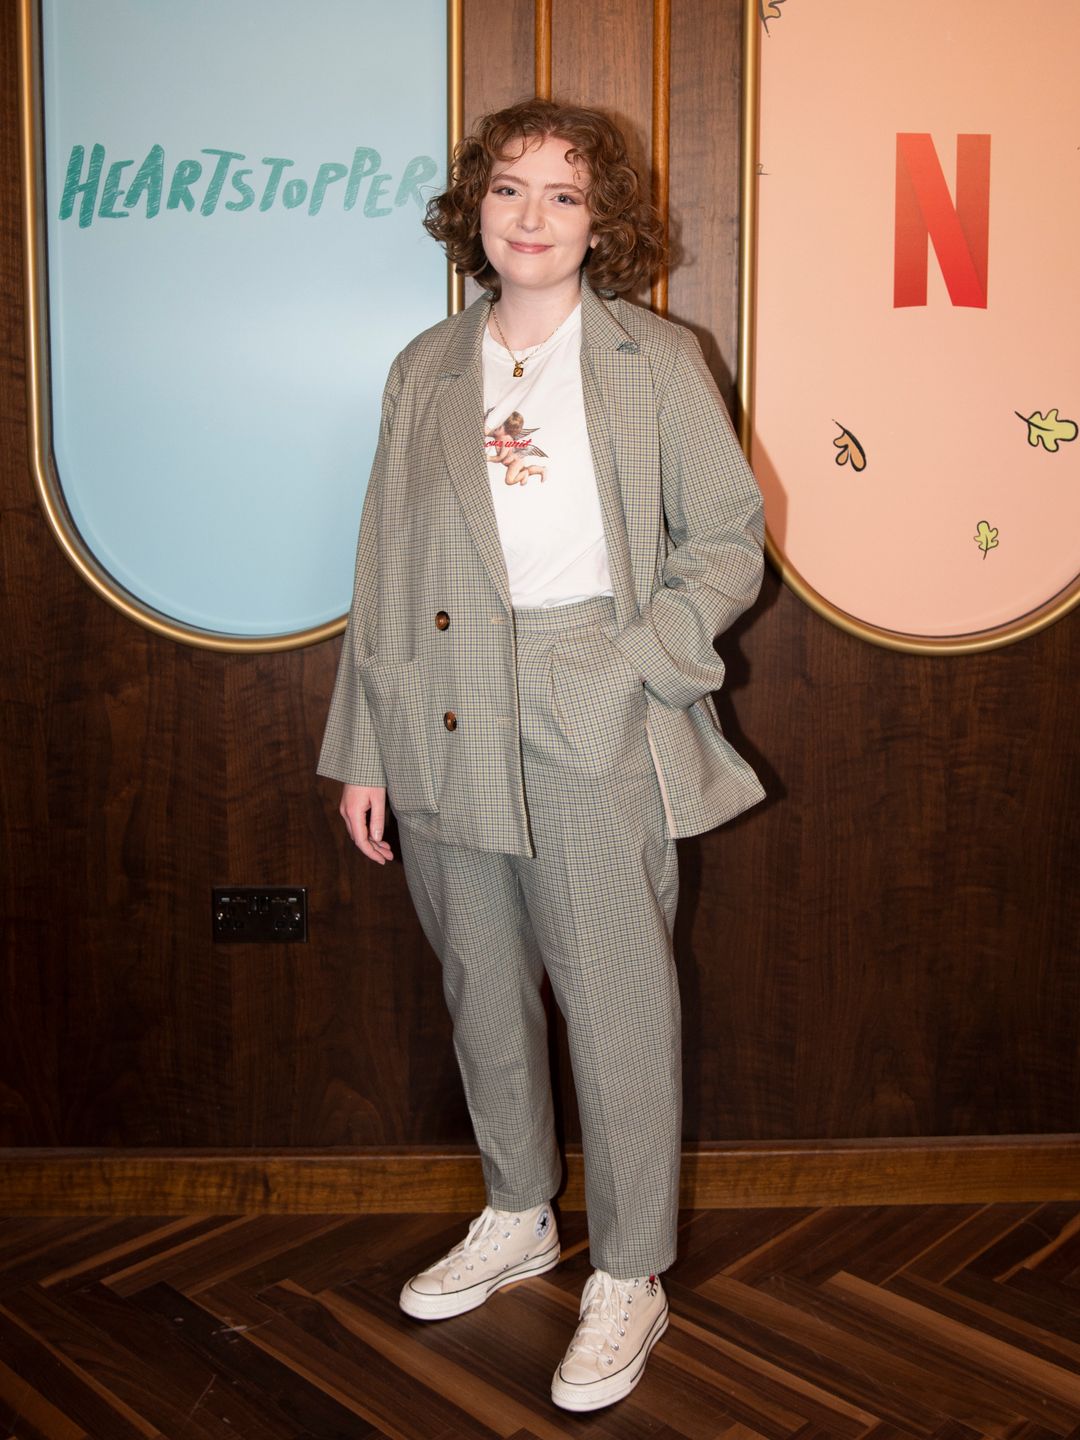 Heartstopper's creator Alice Oseman stood smiling at an exclusive Netflix event